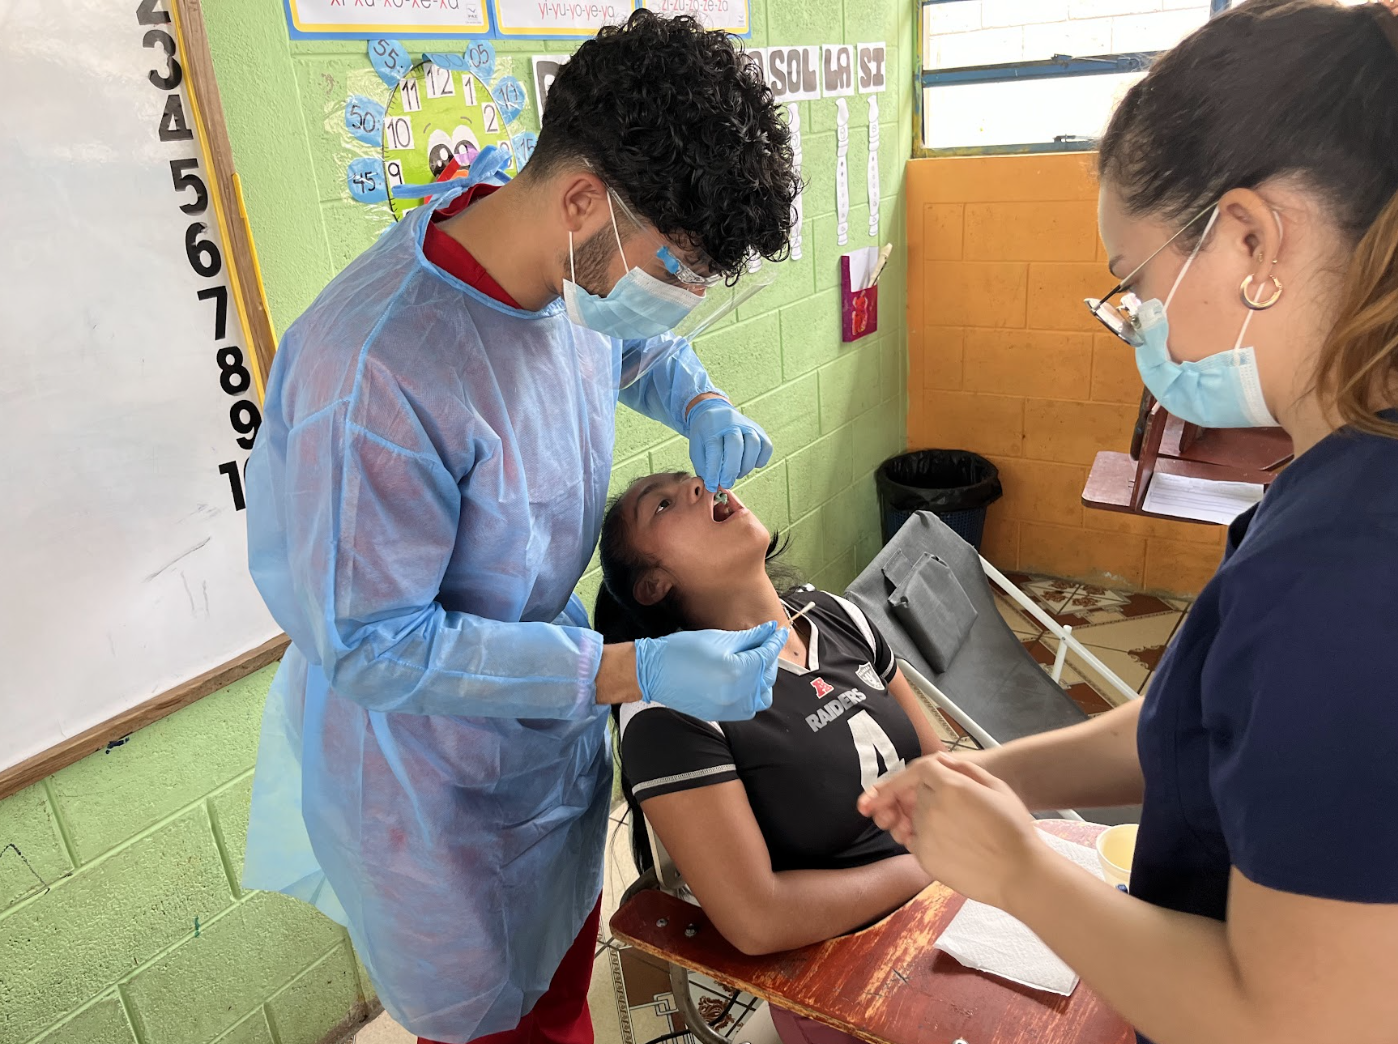 Razi performing oral health care to a young girl with a nurse's help